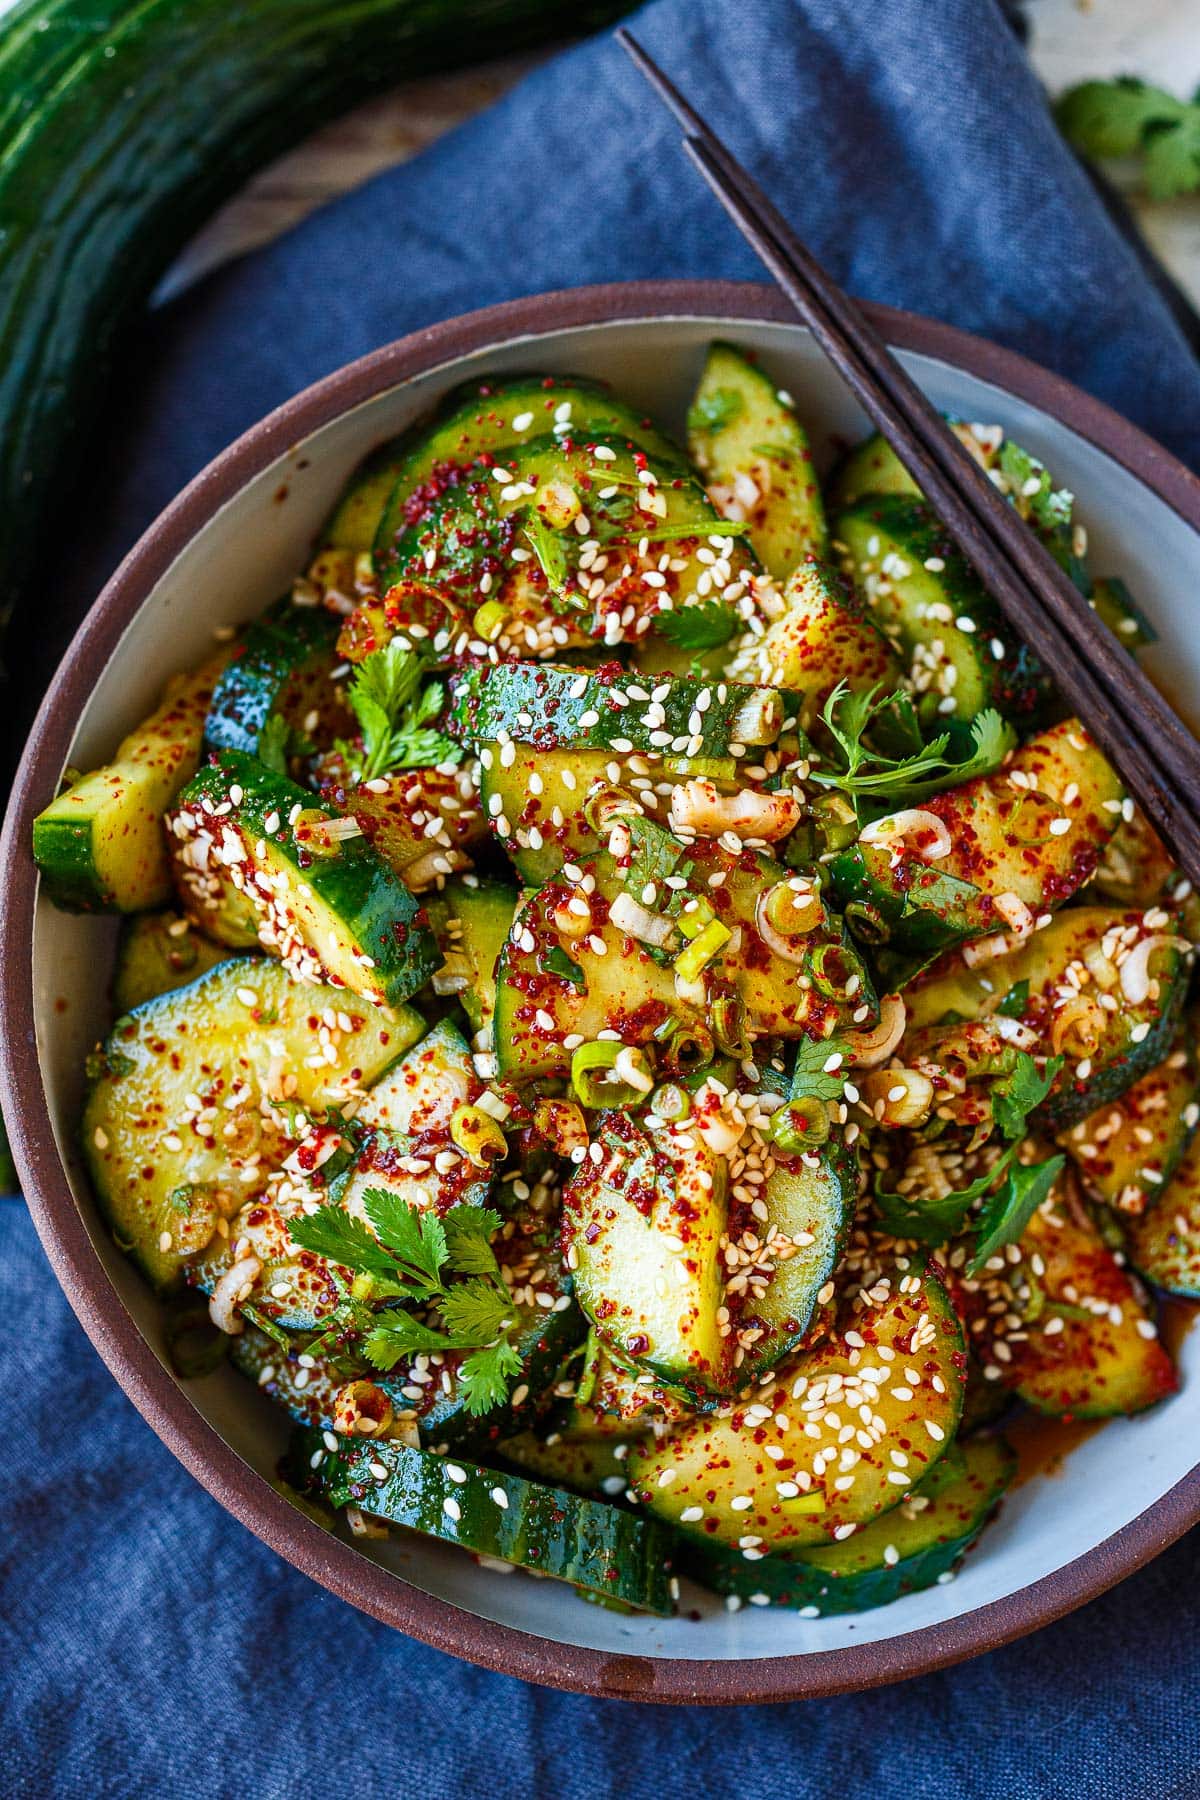 Tangy spicy Korean Cucumber Salad (Oi Muchim) is crunchy, cool, and refreshing. An easy-to-make Korean cucumber side dish that is healthy and delicious.